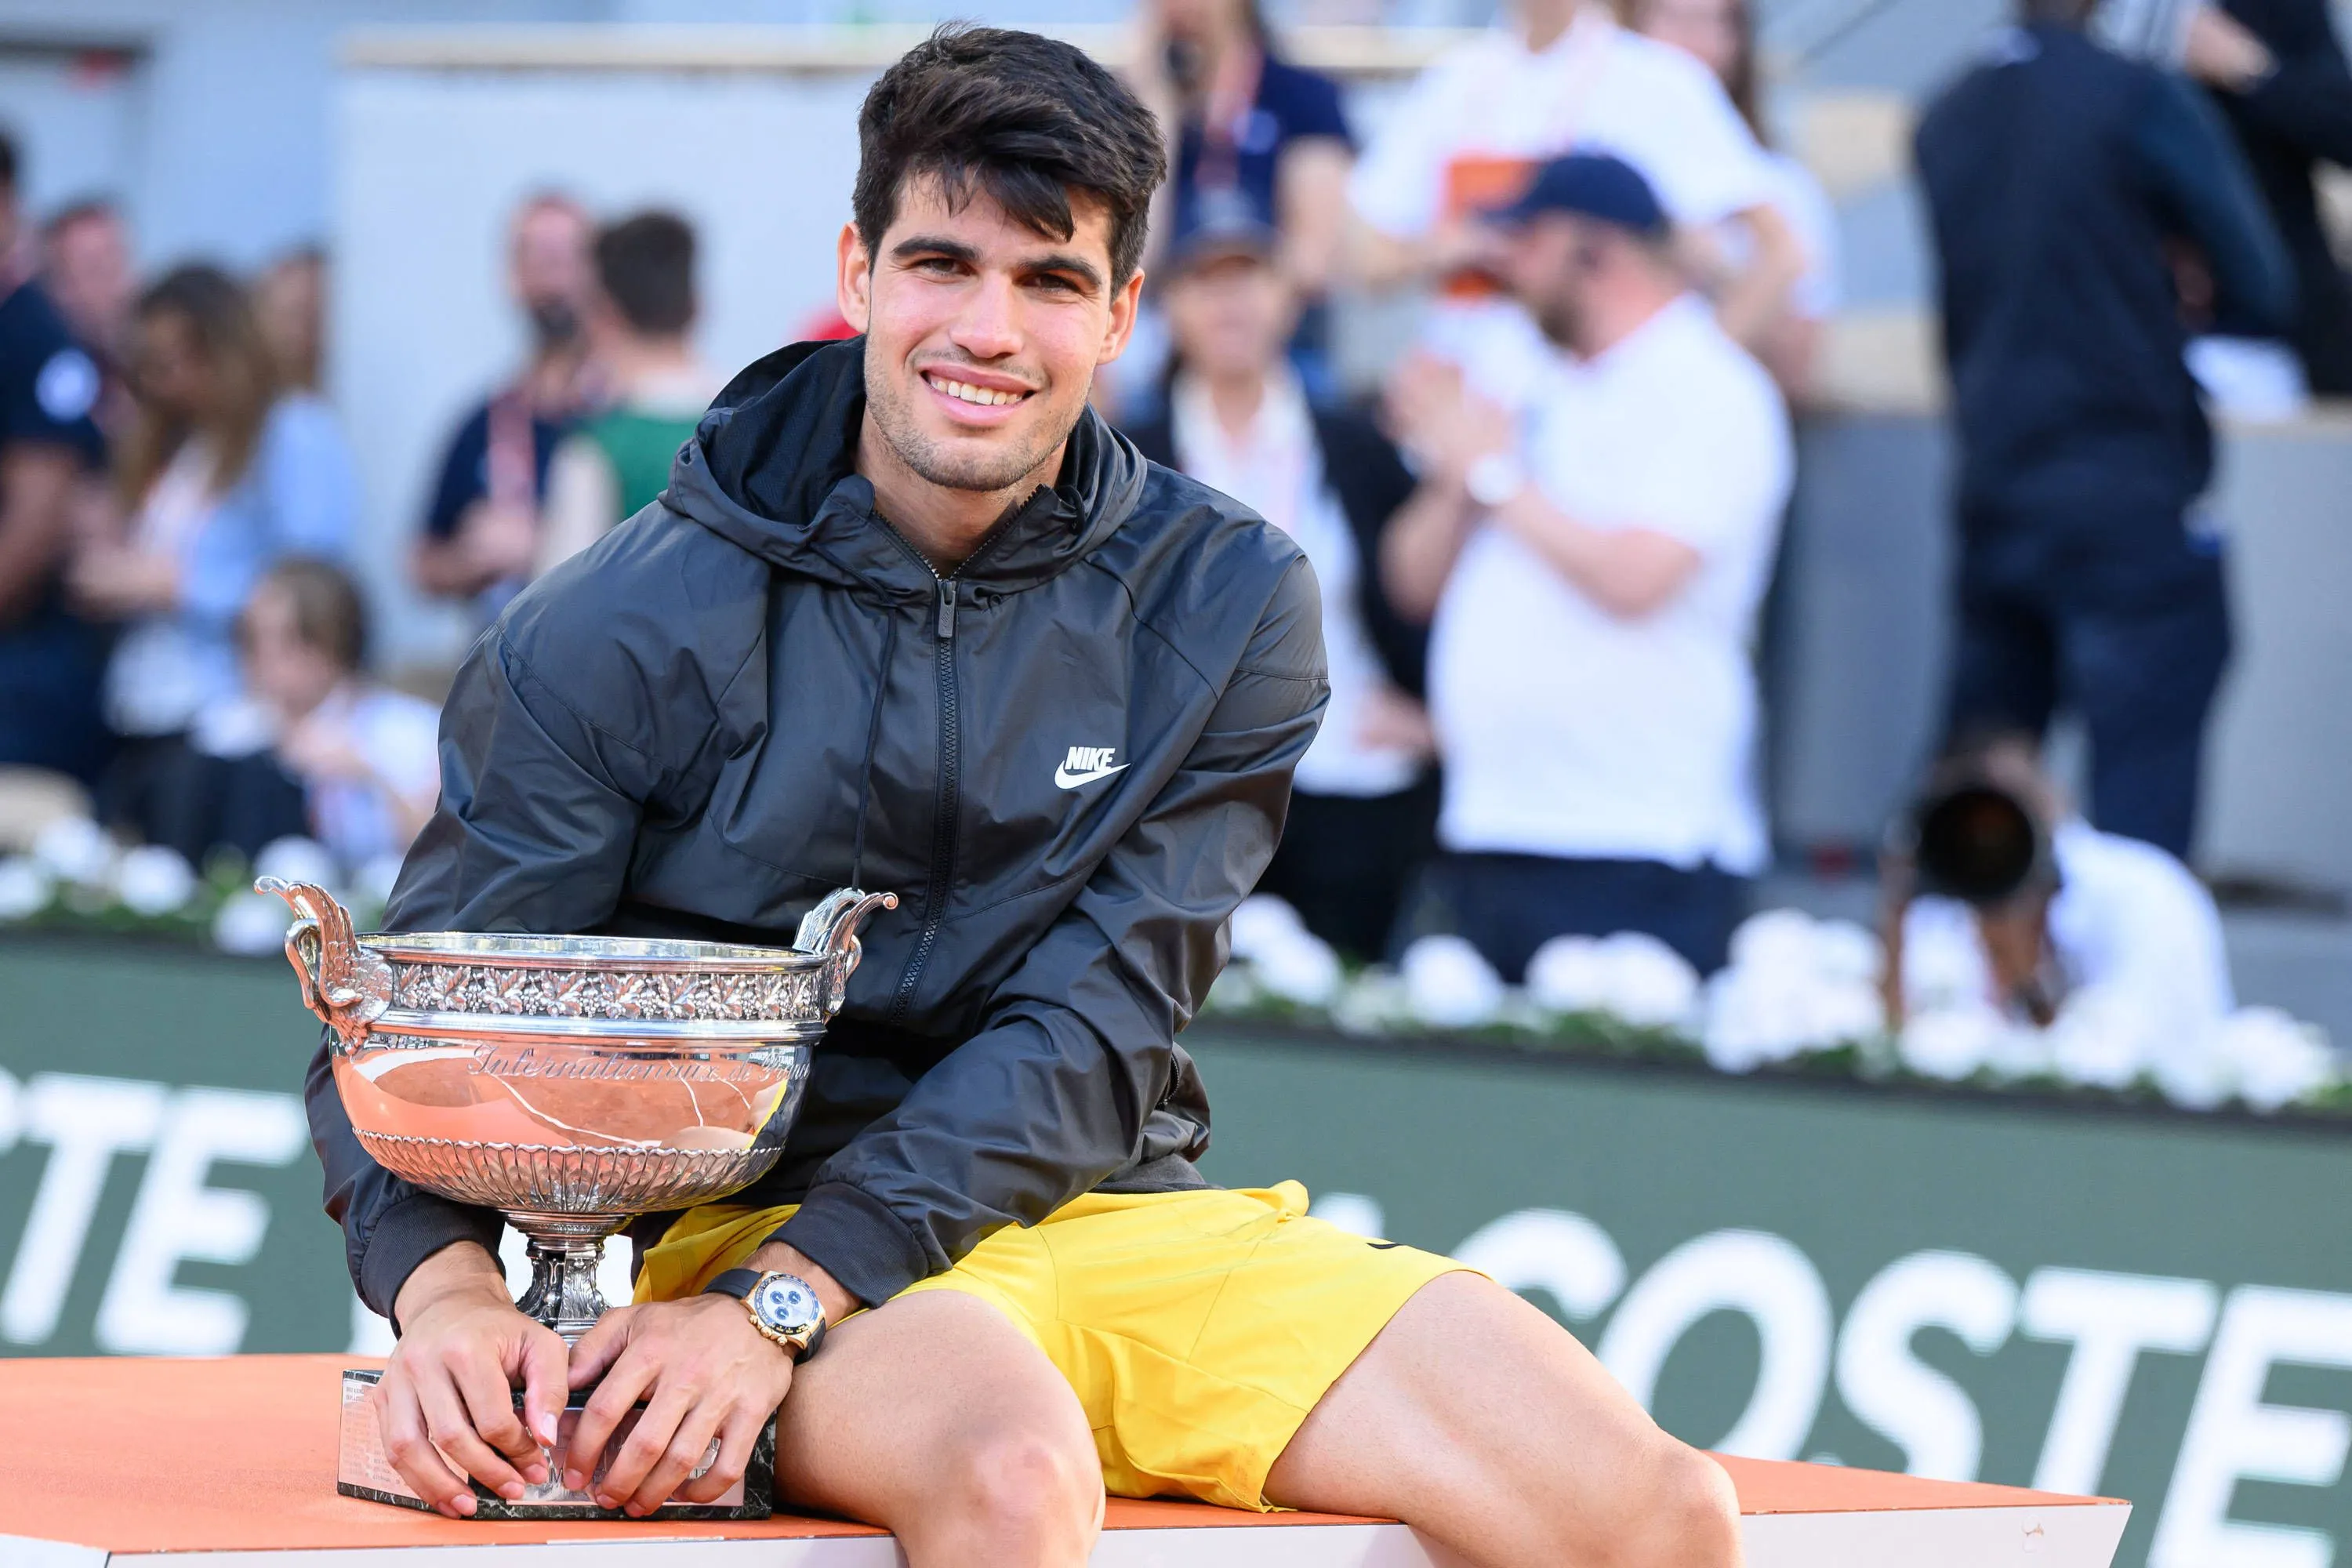 Carlos Alcaraz has recently won the French Open after beating&nbsp;Alexander Zverev in the final.